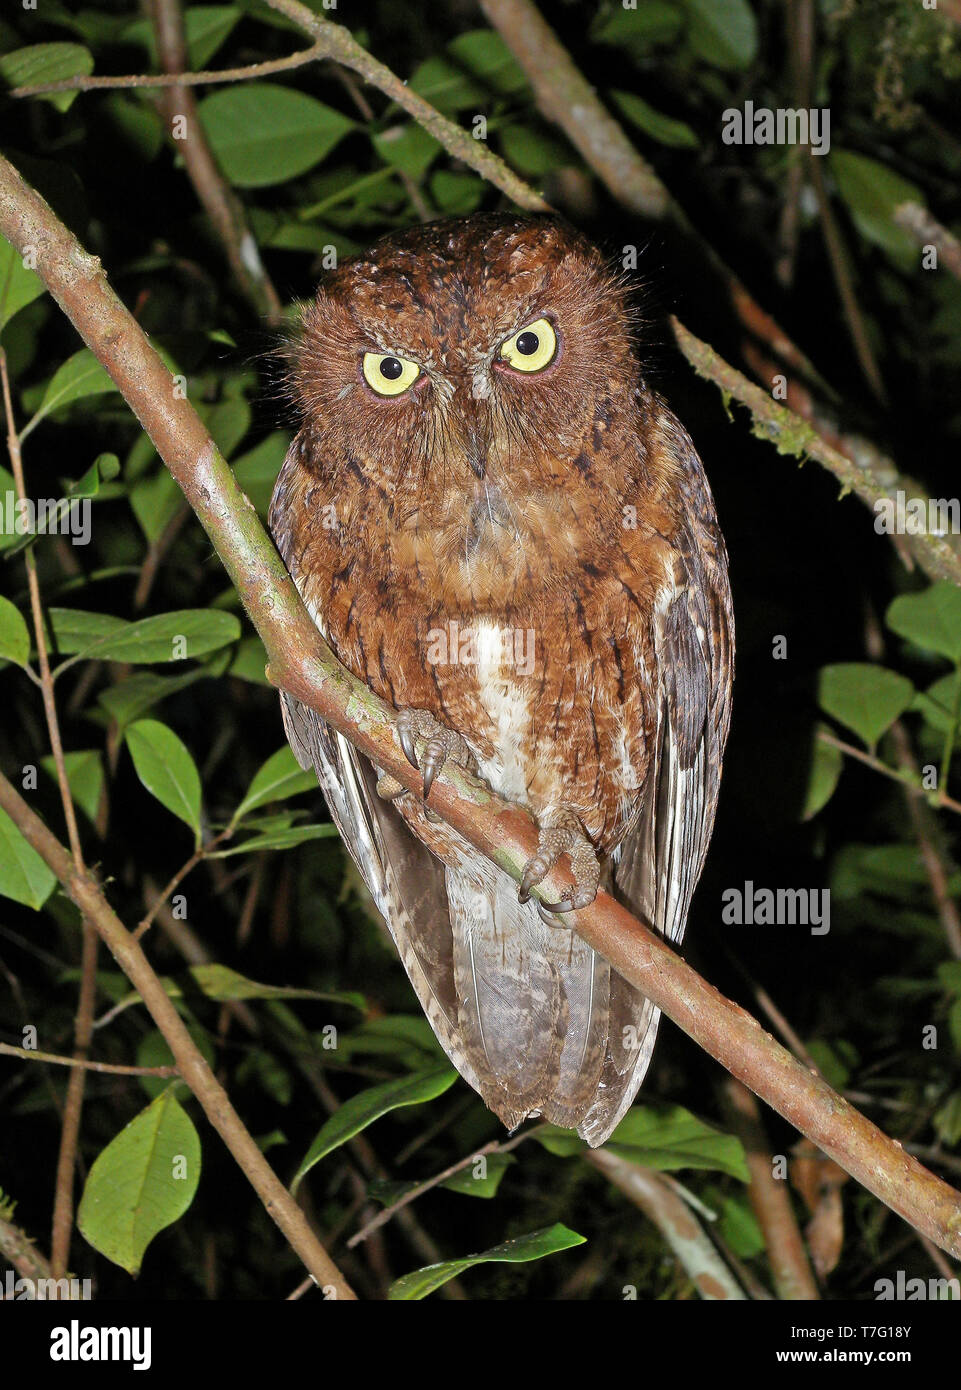 Rainforest scops owl (Otus rutilus), also known as the Malagasy scops owl or Madagascar scops owl. Perched on a branch in the forest during the night Stock Photo